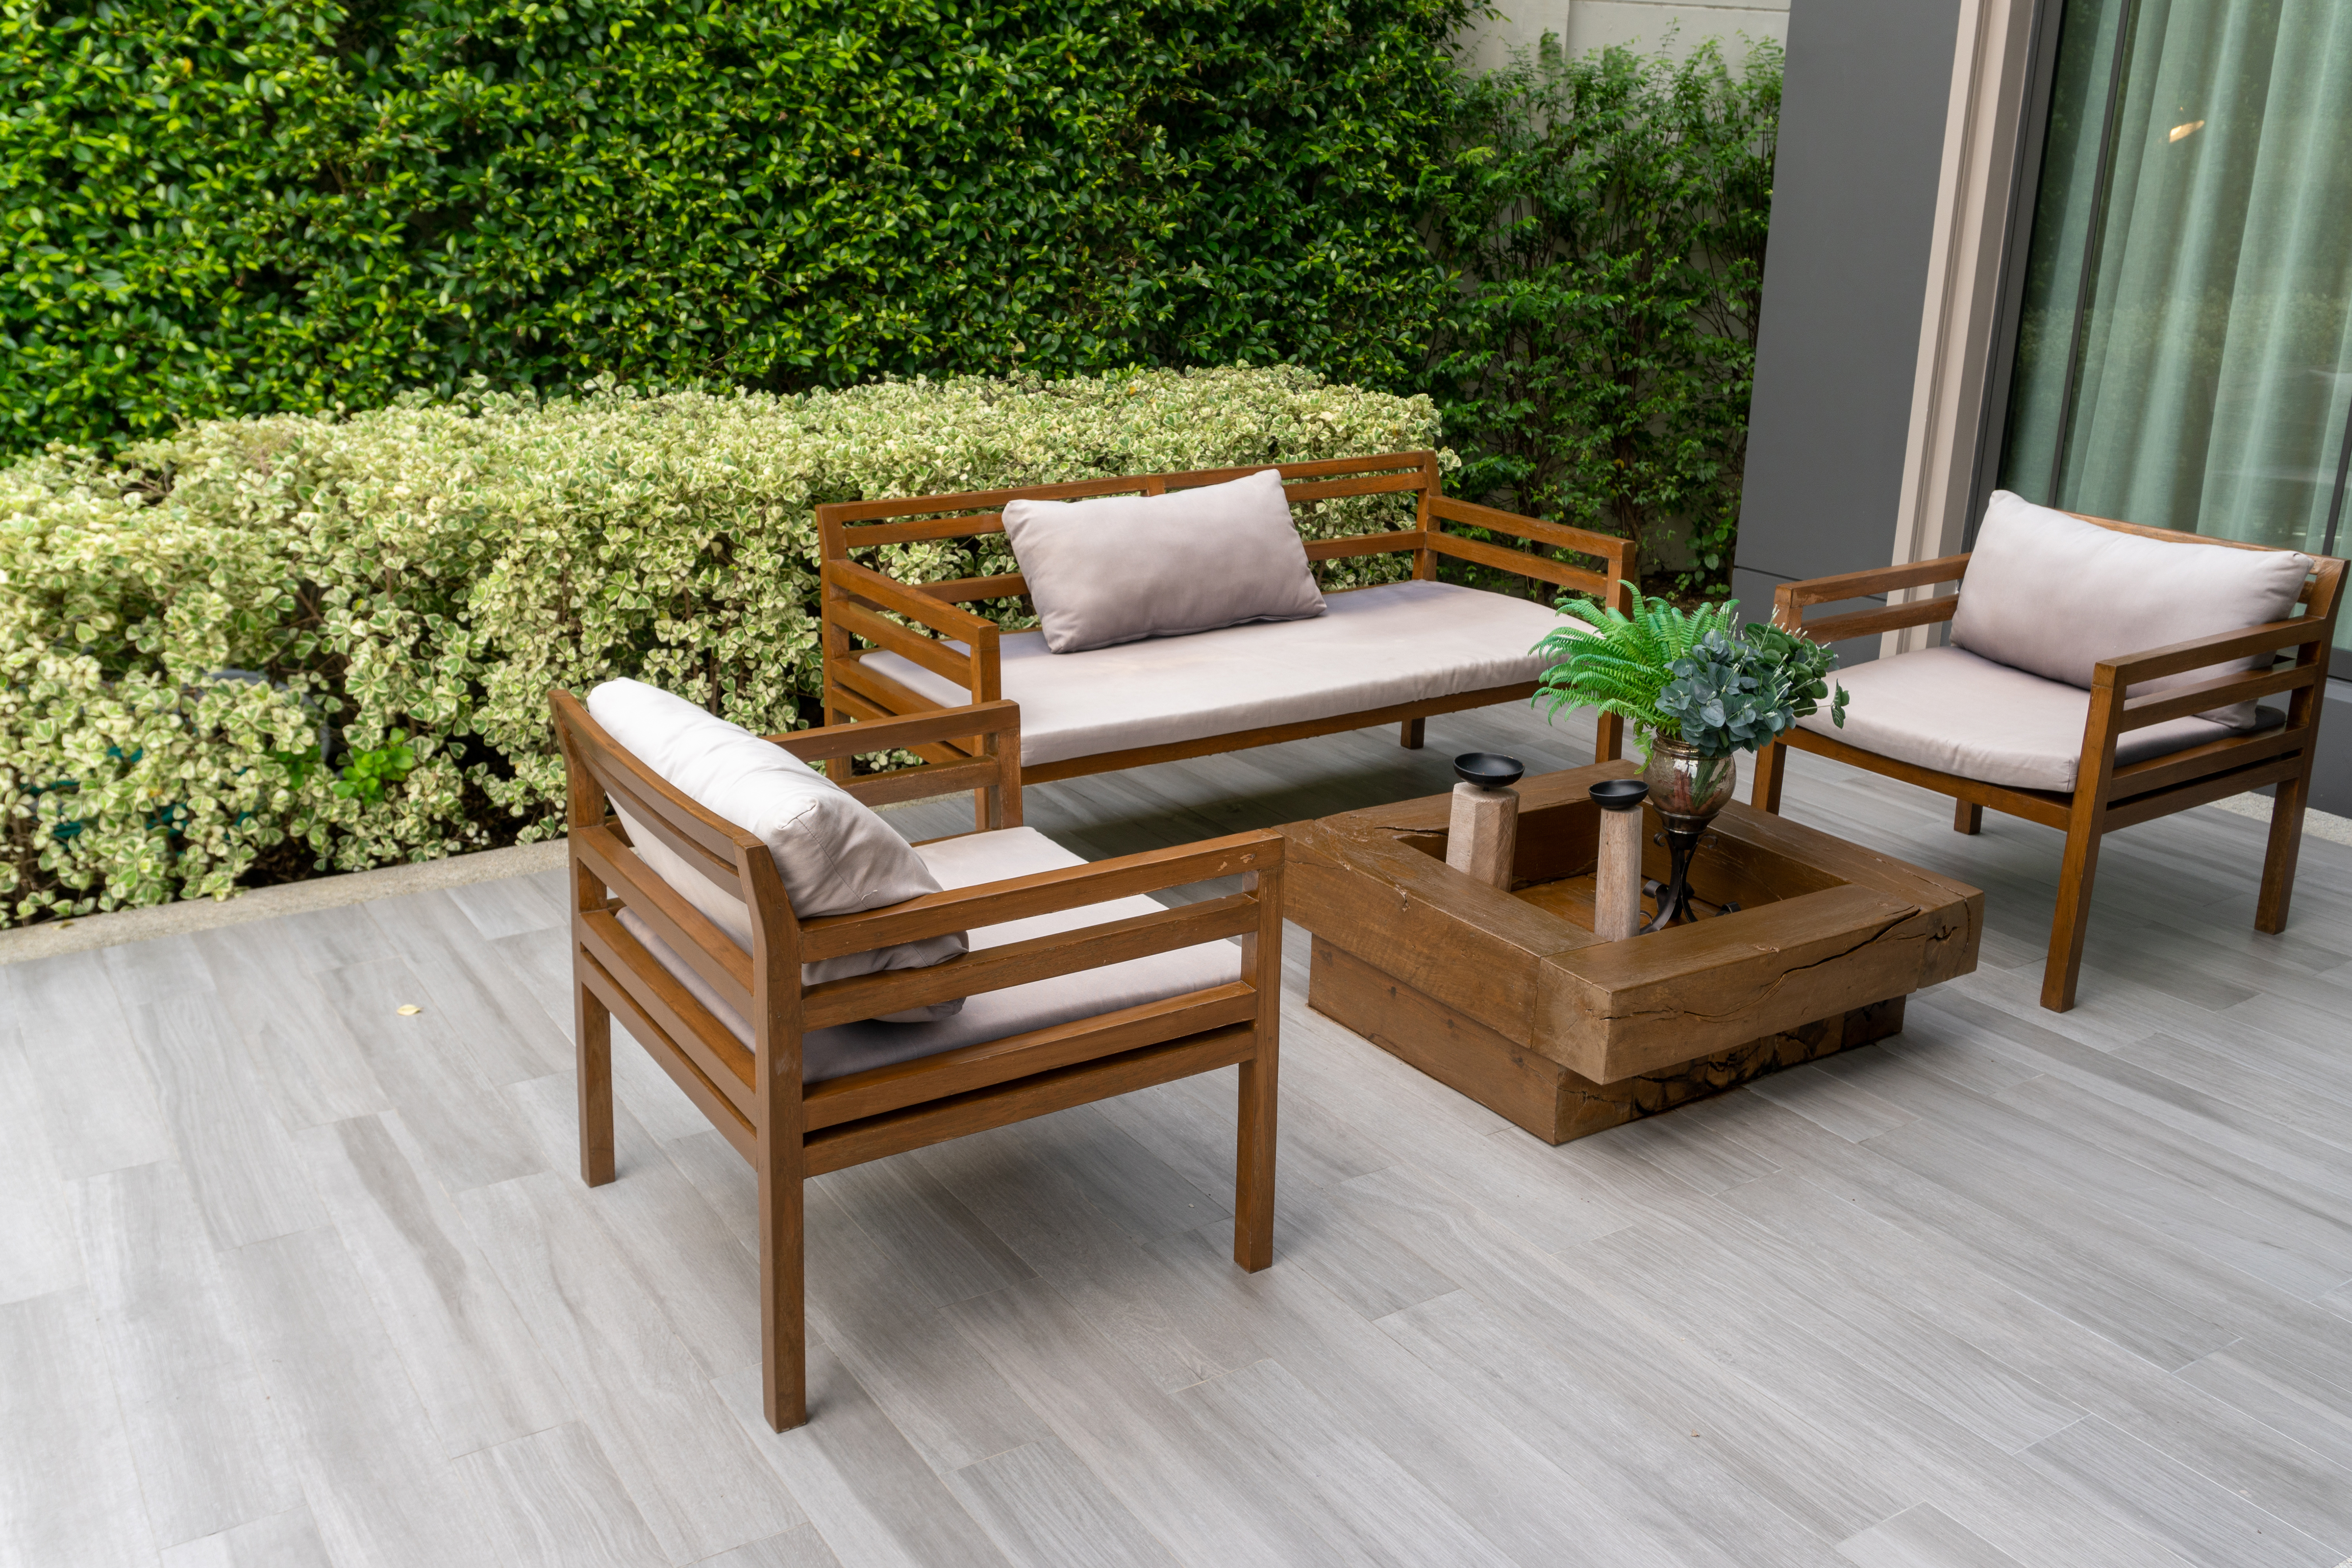 Wood is a great outdoor flooring option